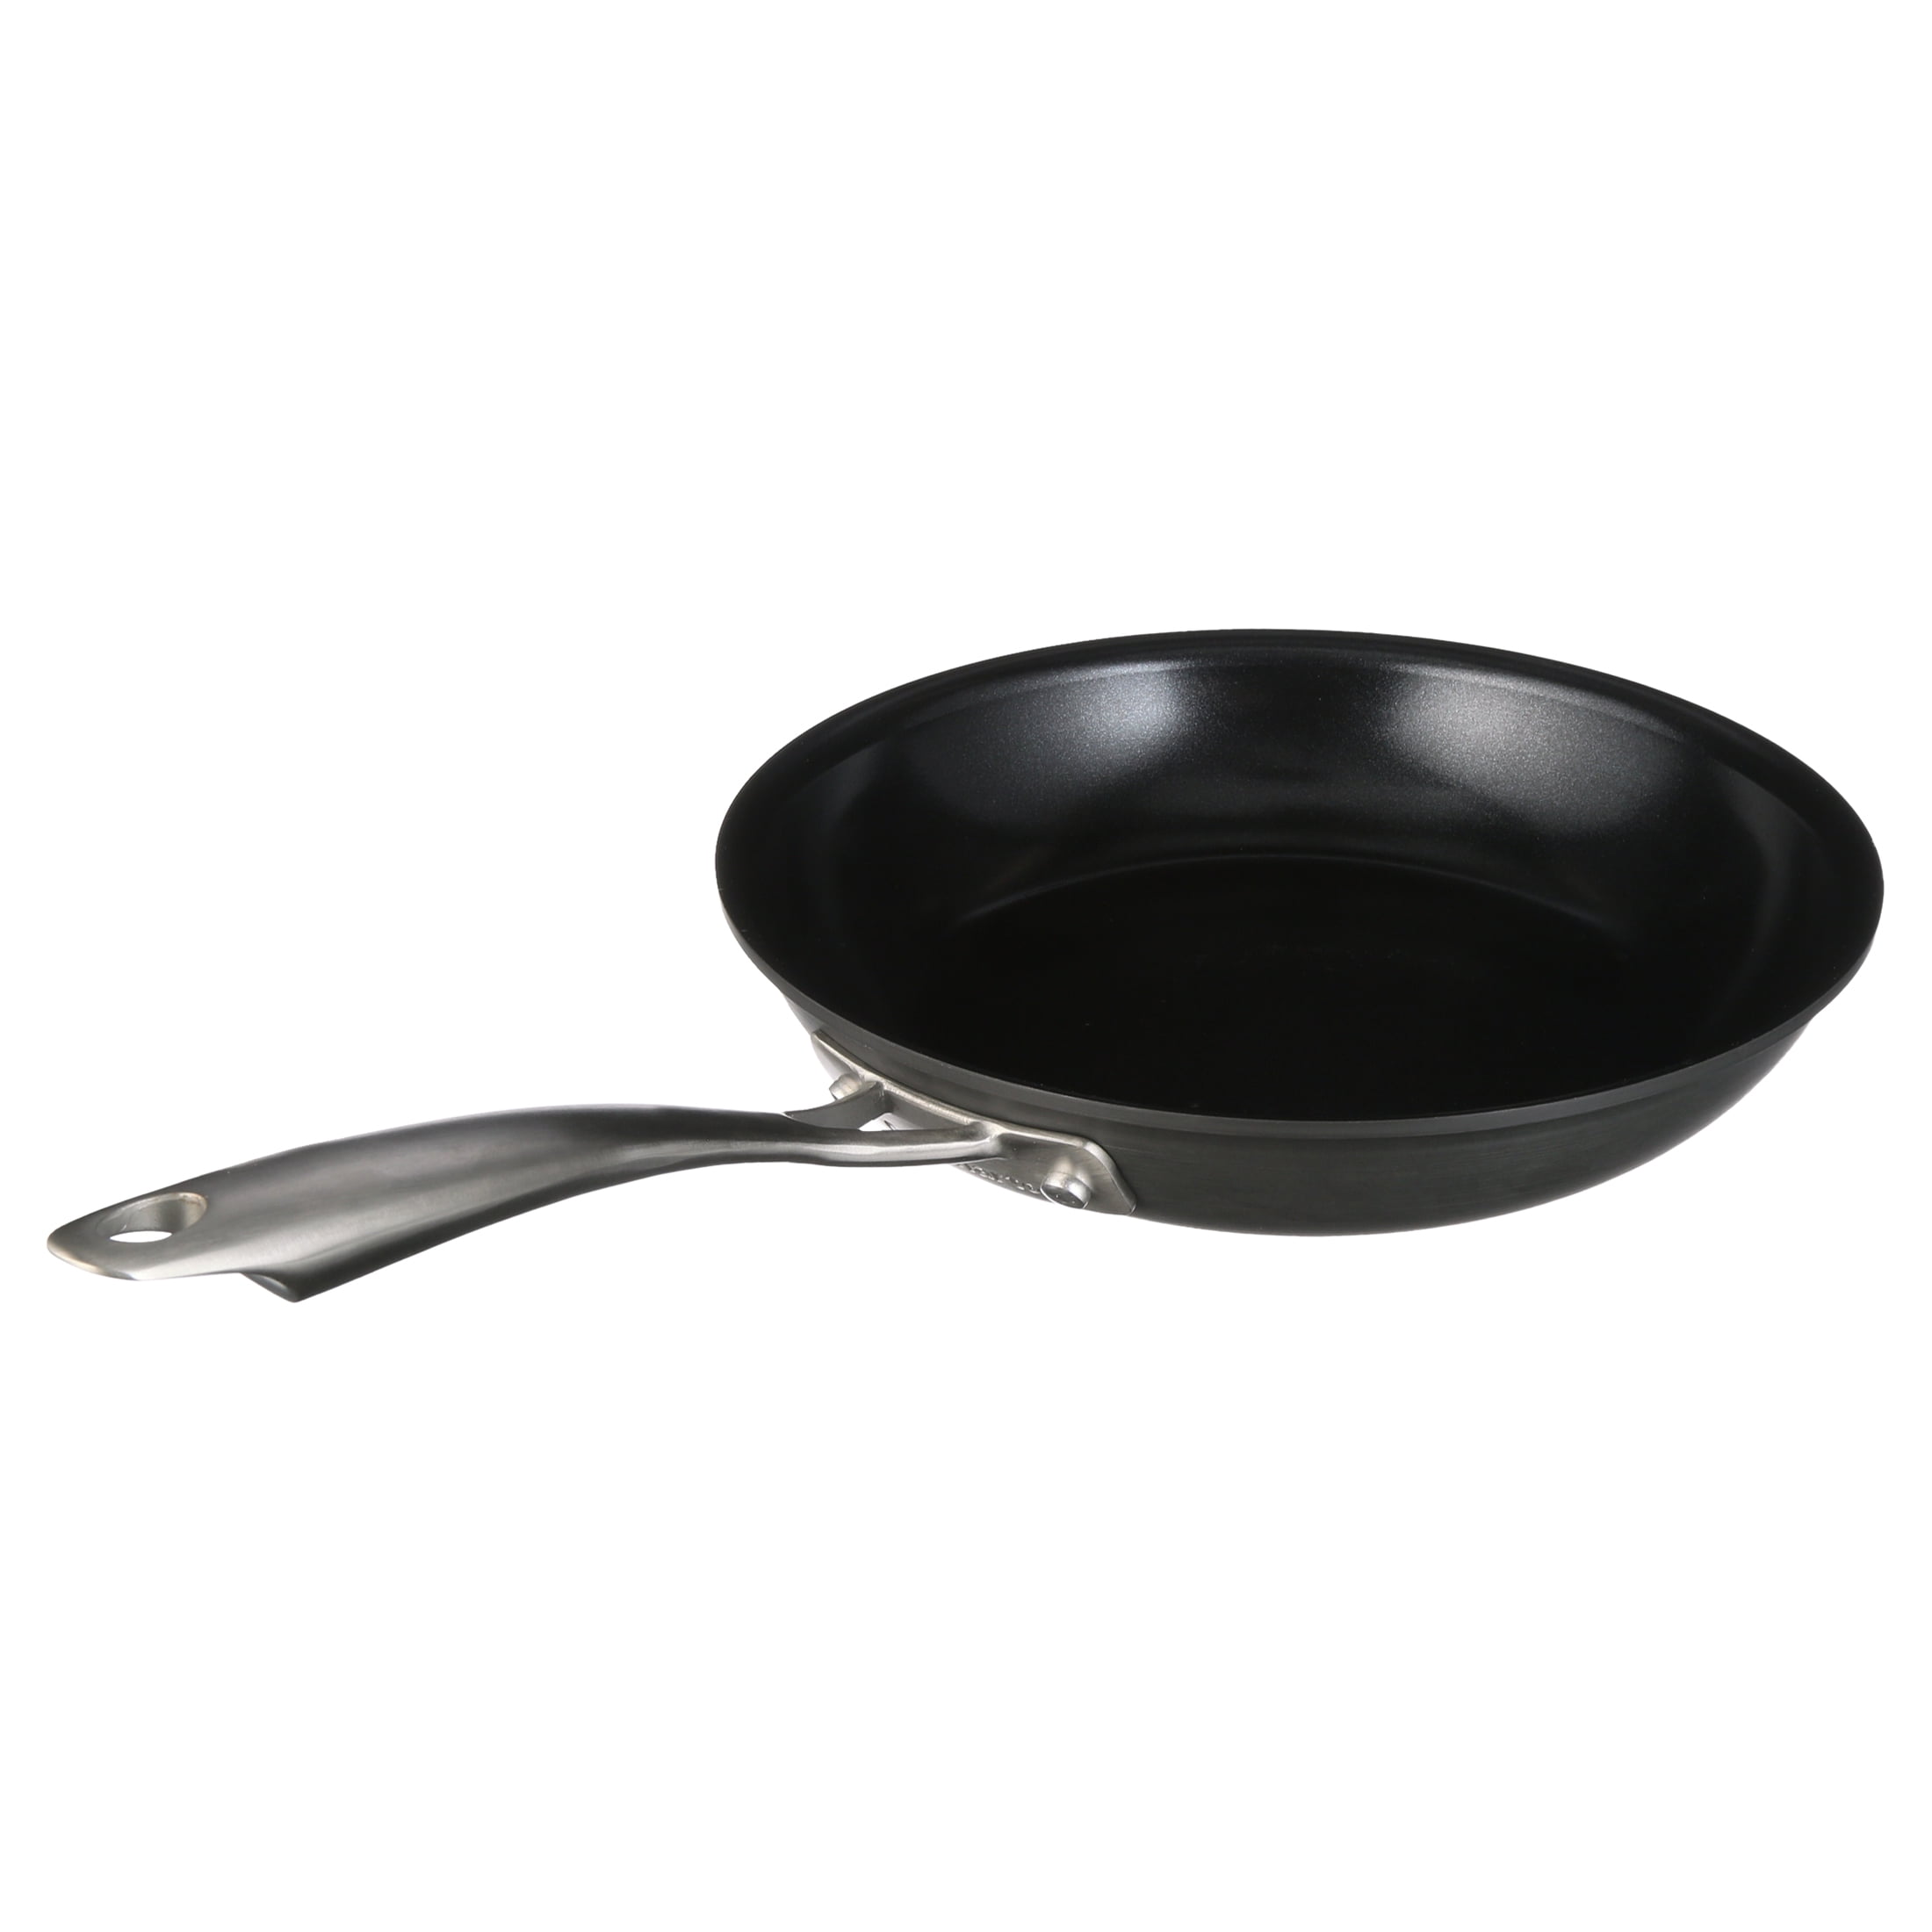 Green Gourmet Non-Stick Hard Anodized 10 Griddle/Crepe Pan - Bed Bath &  Beyond - 7211747